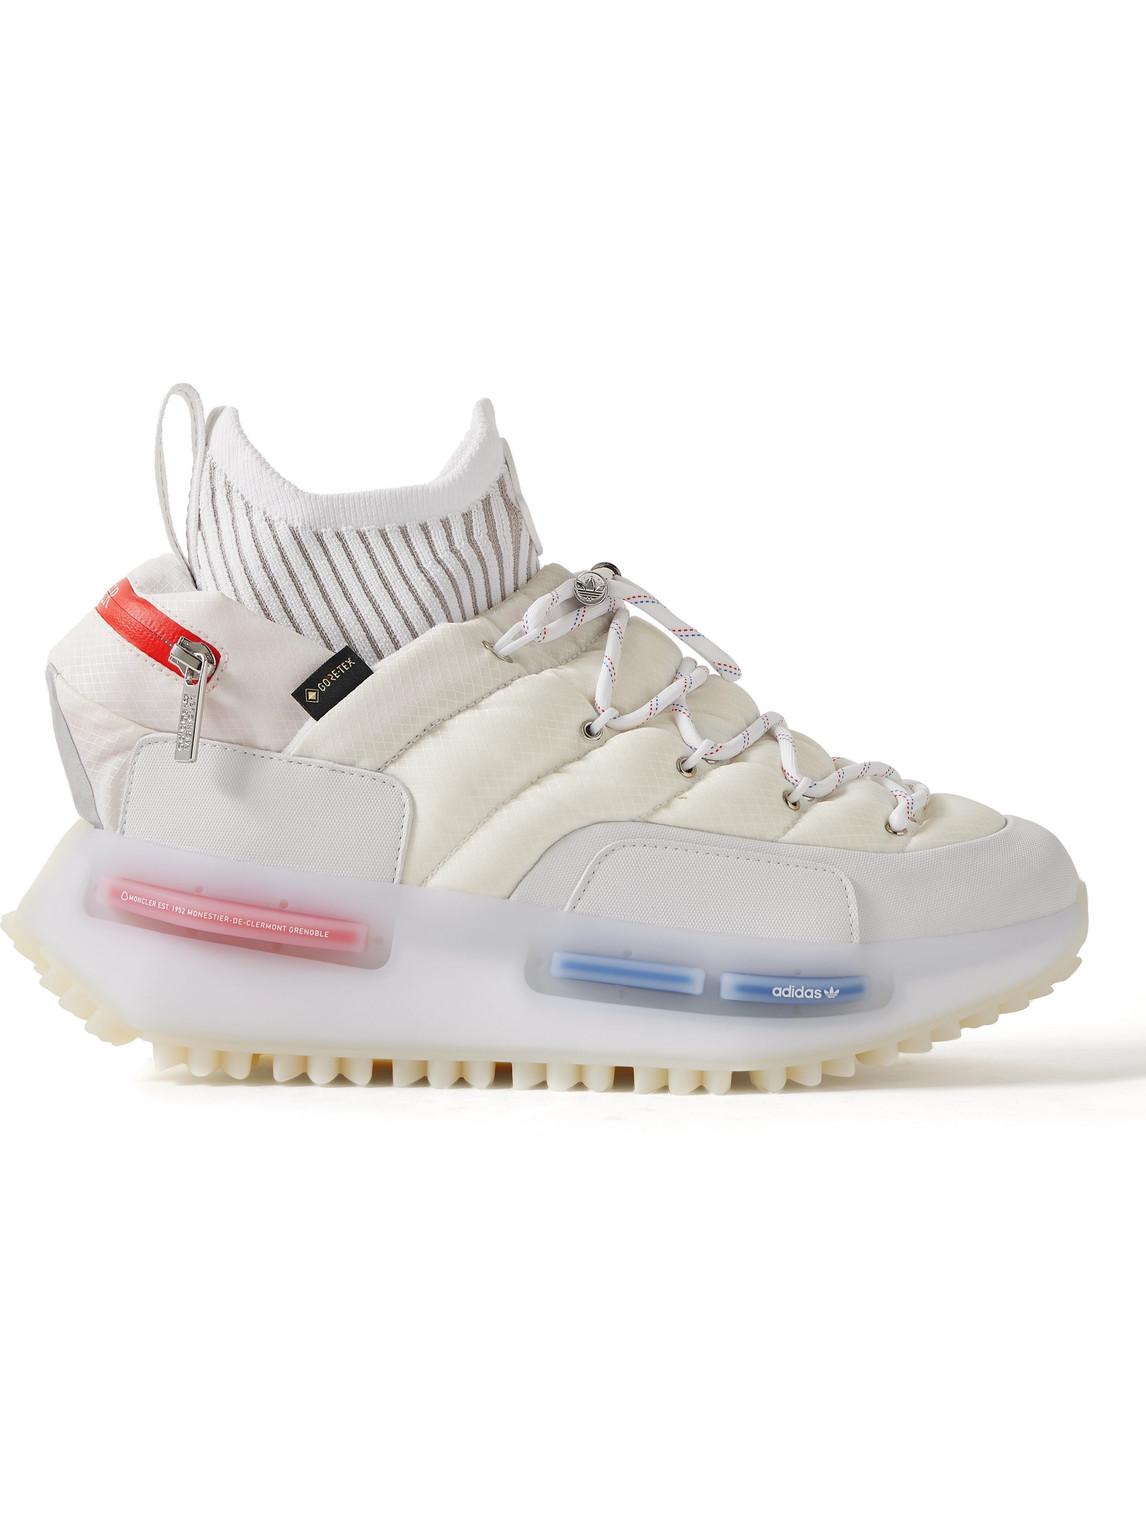 Moncler Genius Adidas Originals Nmd Runner Stretch Jersey-trimmed Quilted  Gore-textm High-top Sneakers in White for Men | Lyst